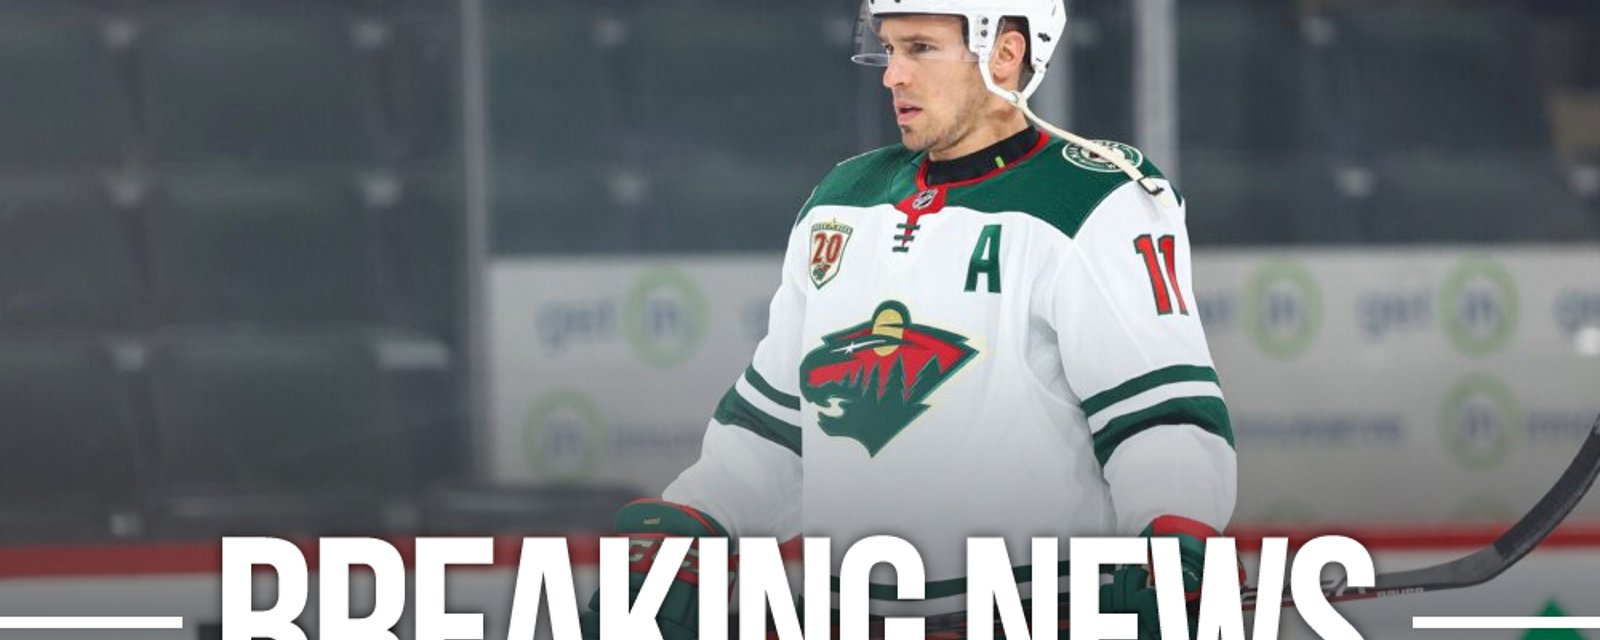 Report: Things get ugly between Parise and coach Evason